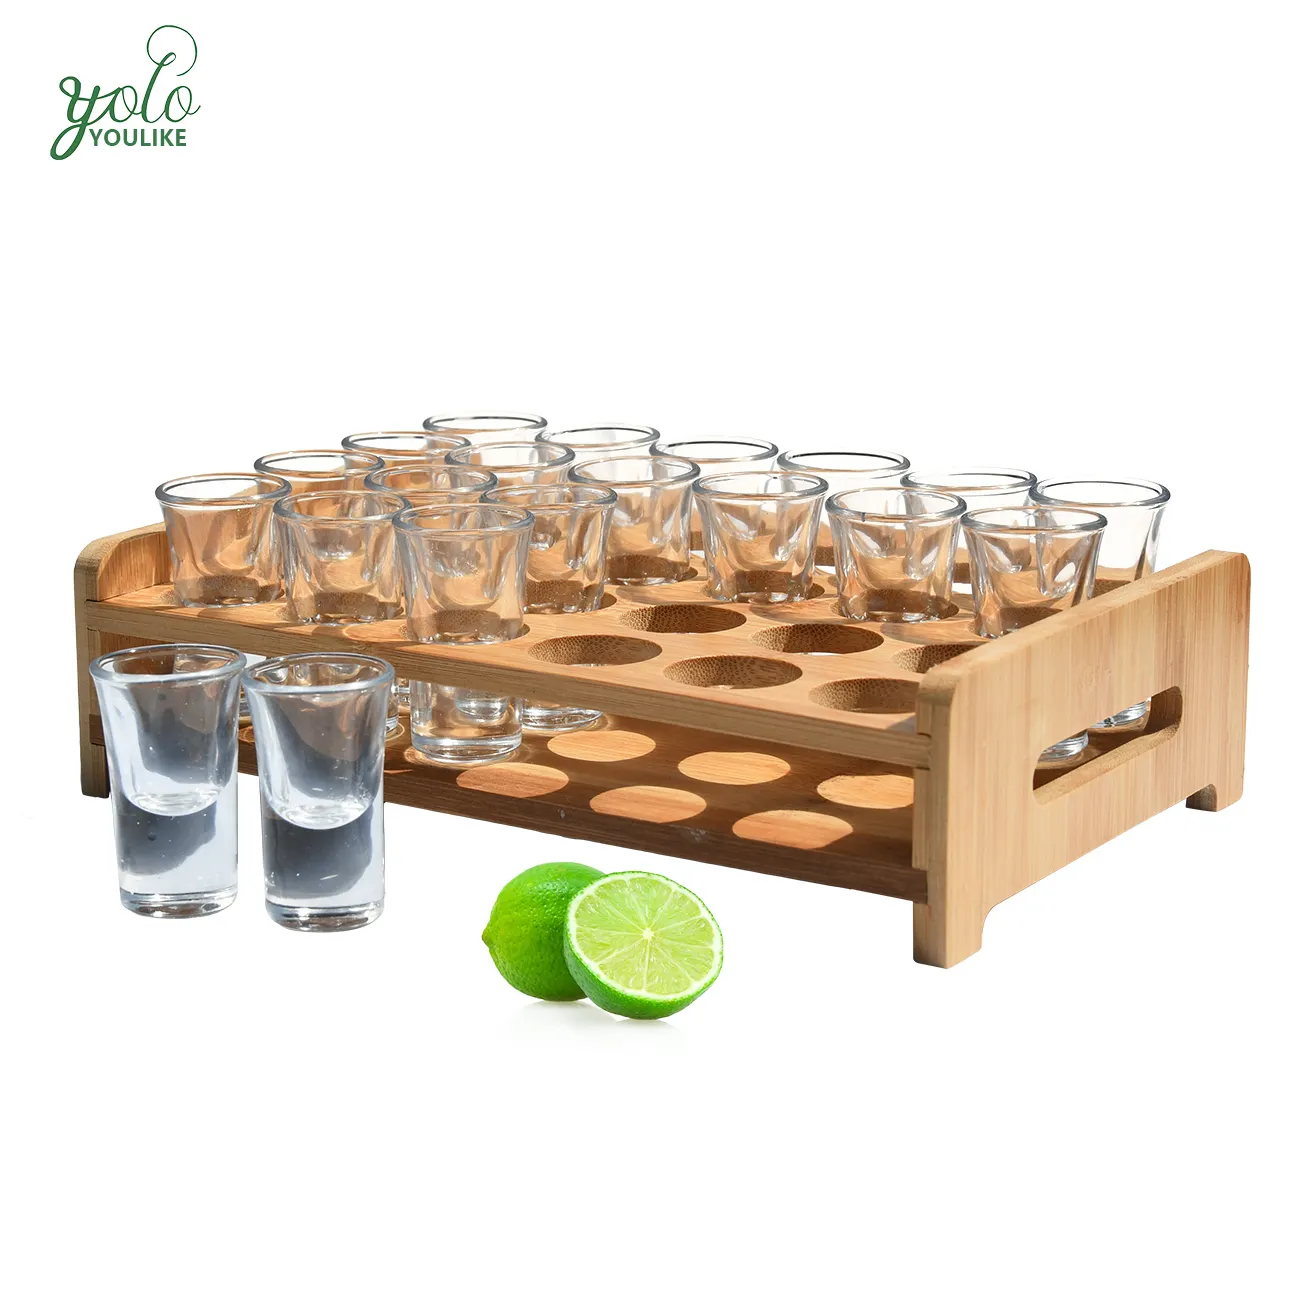 Bamboo 24pcs Shot Glasses Tray Holder Organizer With Clear Whiskey Tequila Glass Cups Set For Party Club Bar